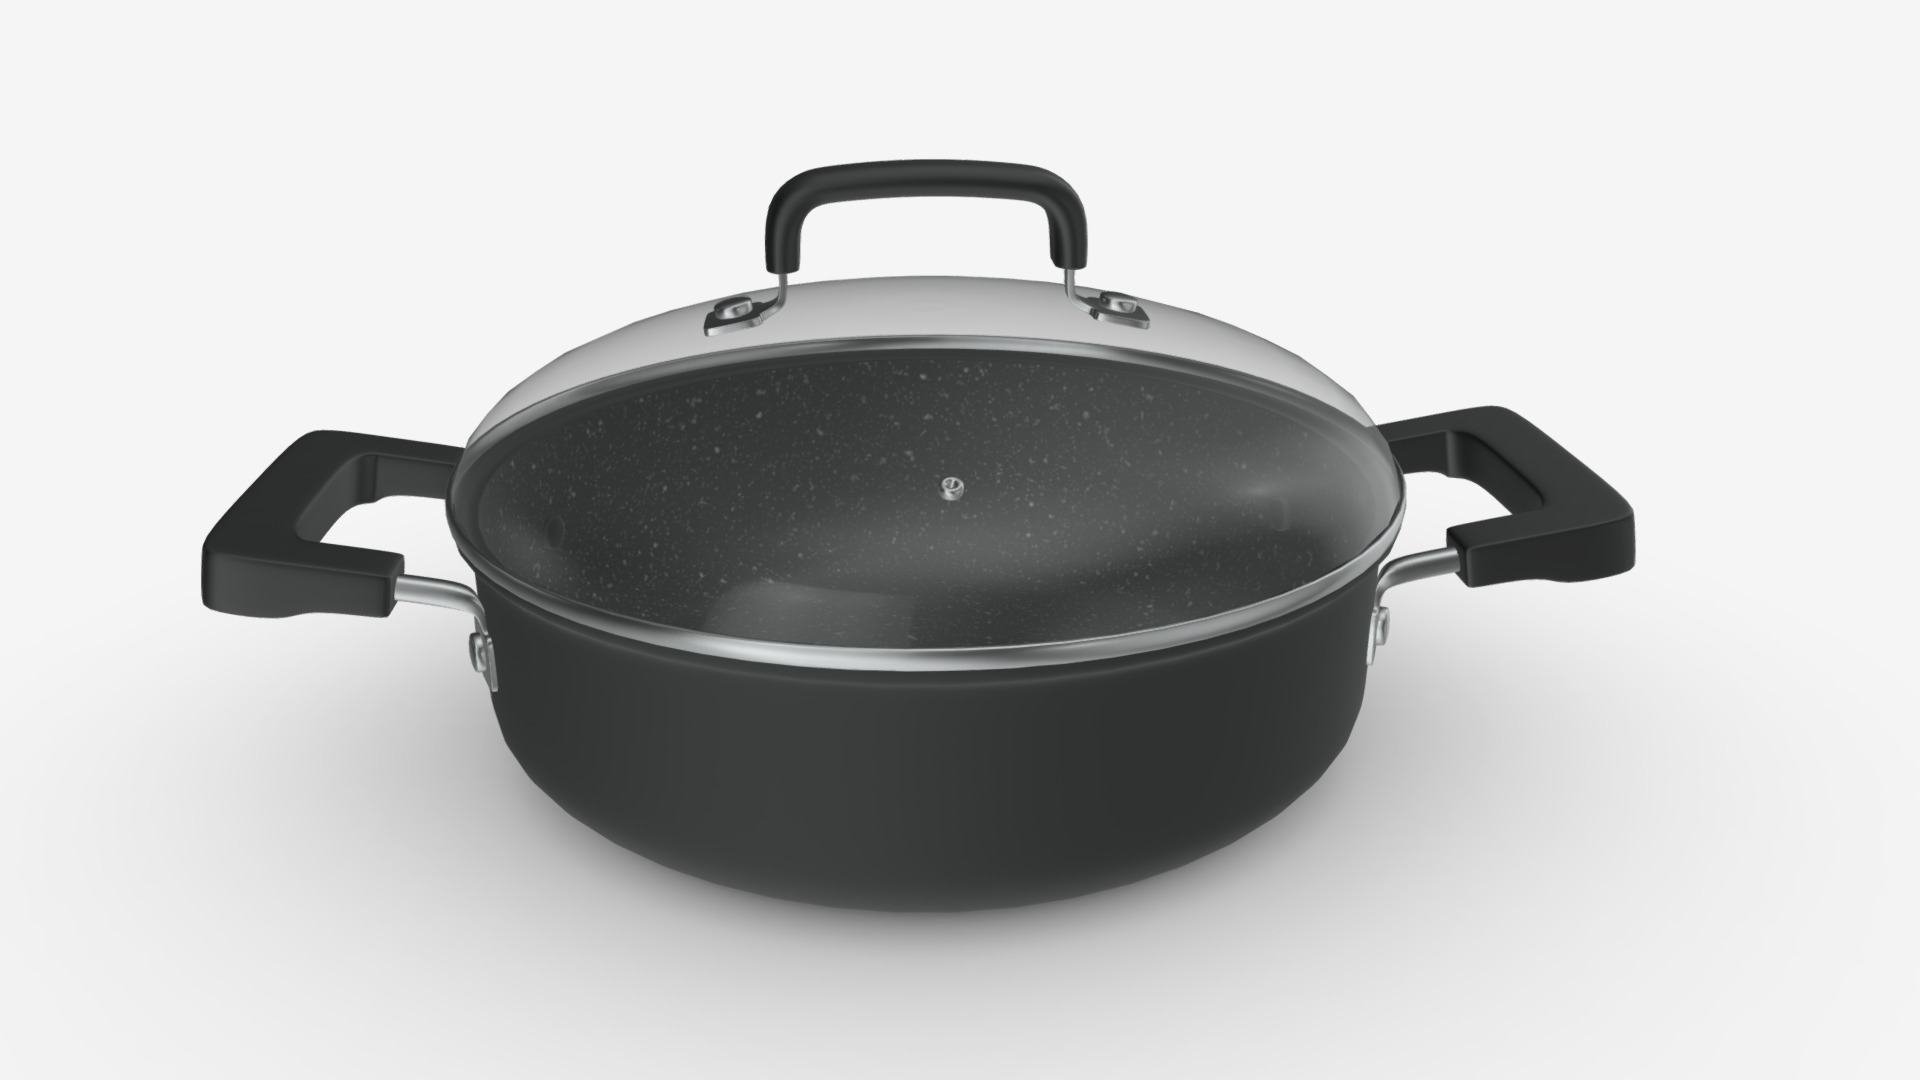 3D model kitchen pot - This is a 3D model of the kitchen pot. The 3D model is about a black and silver cooking pot.